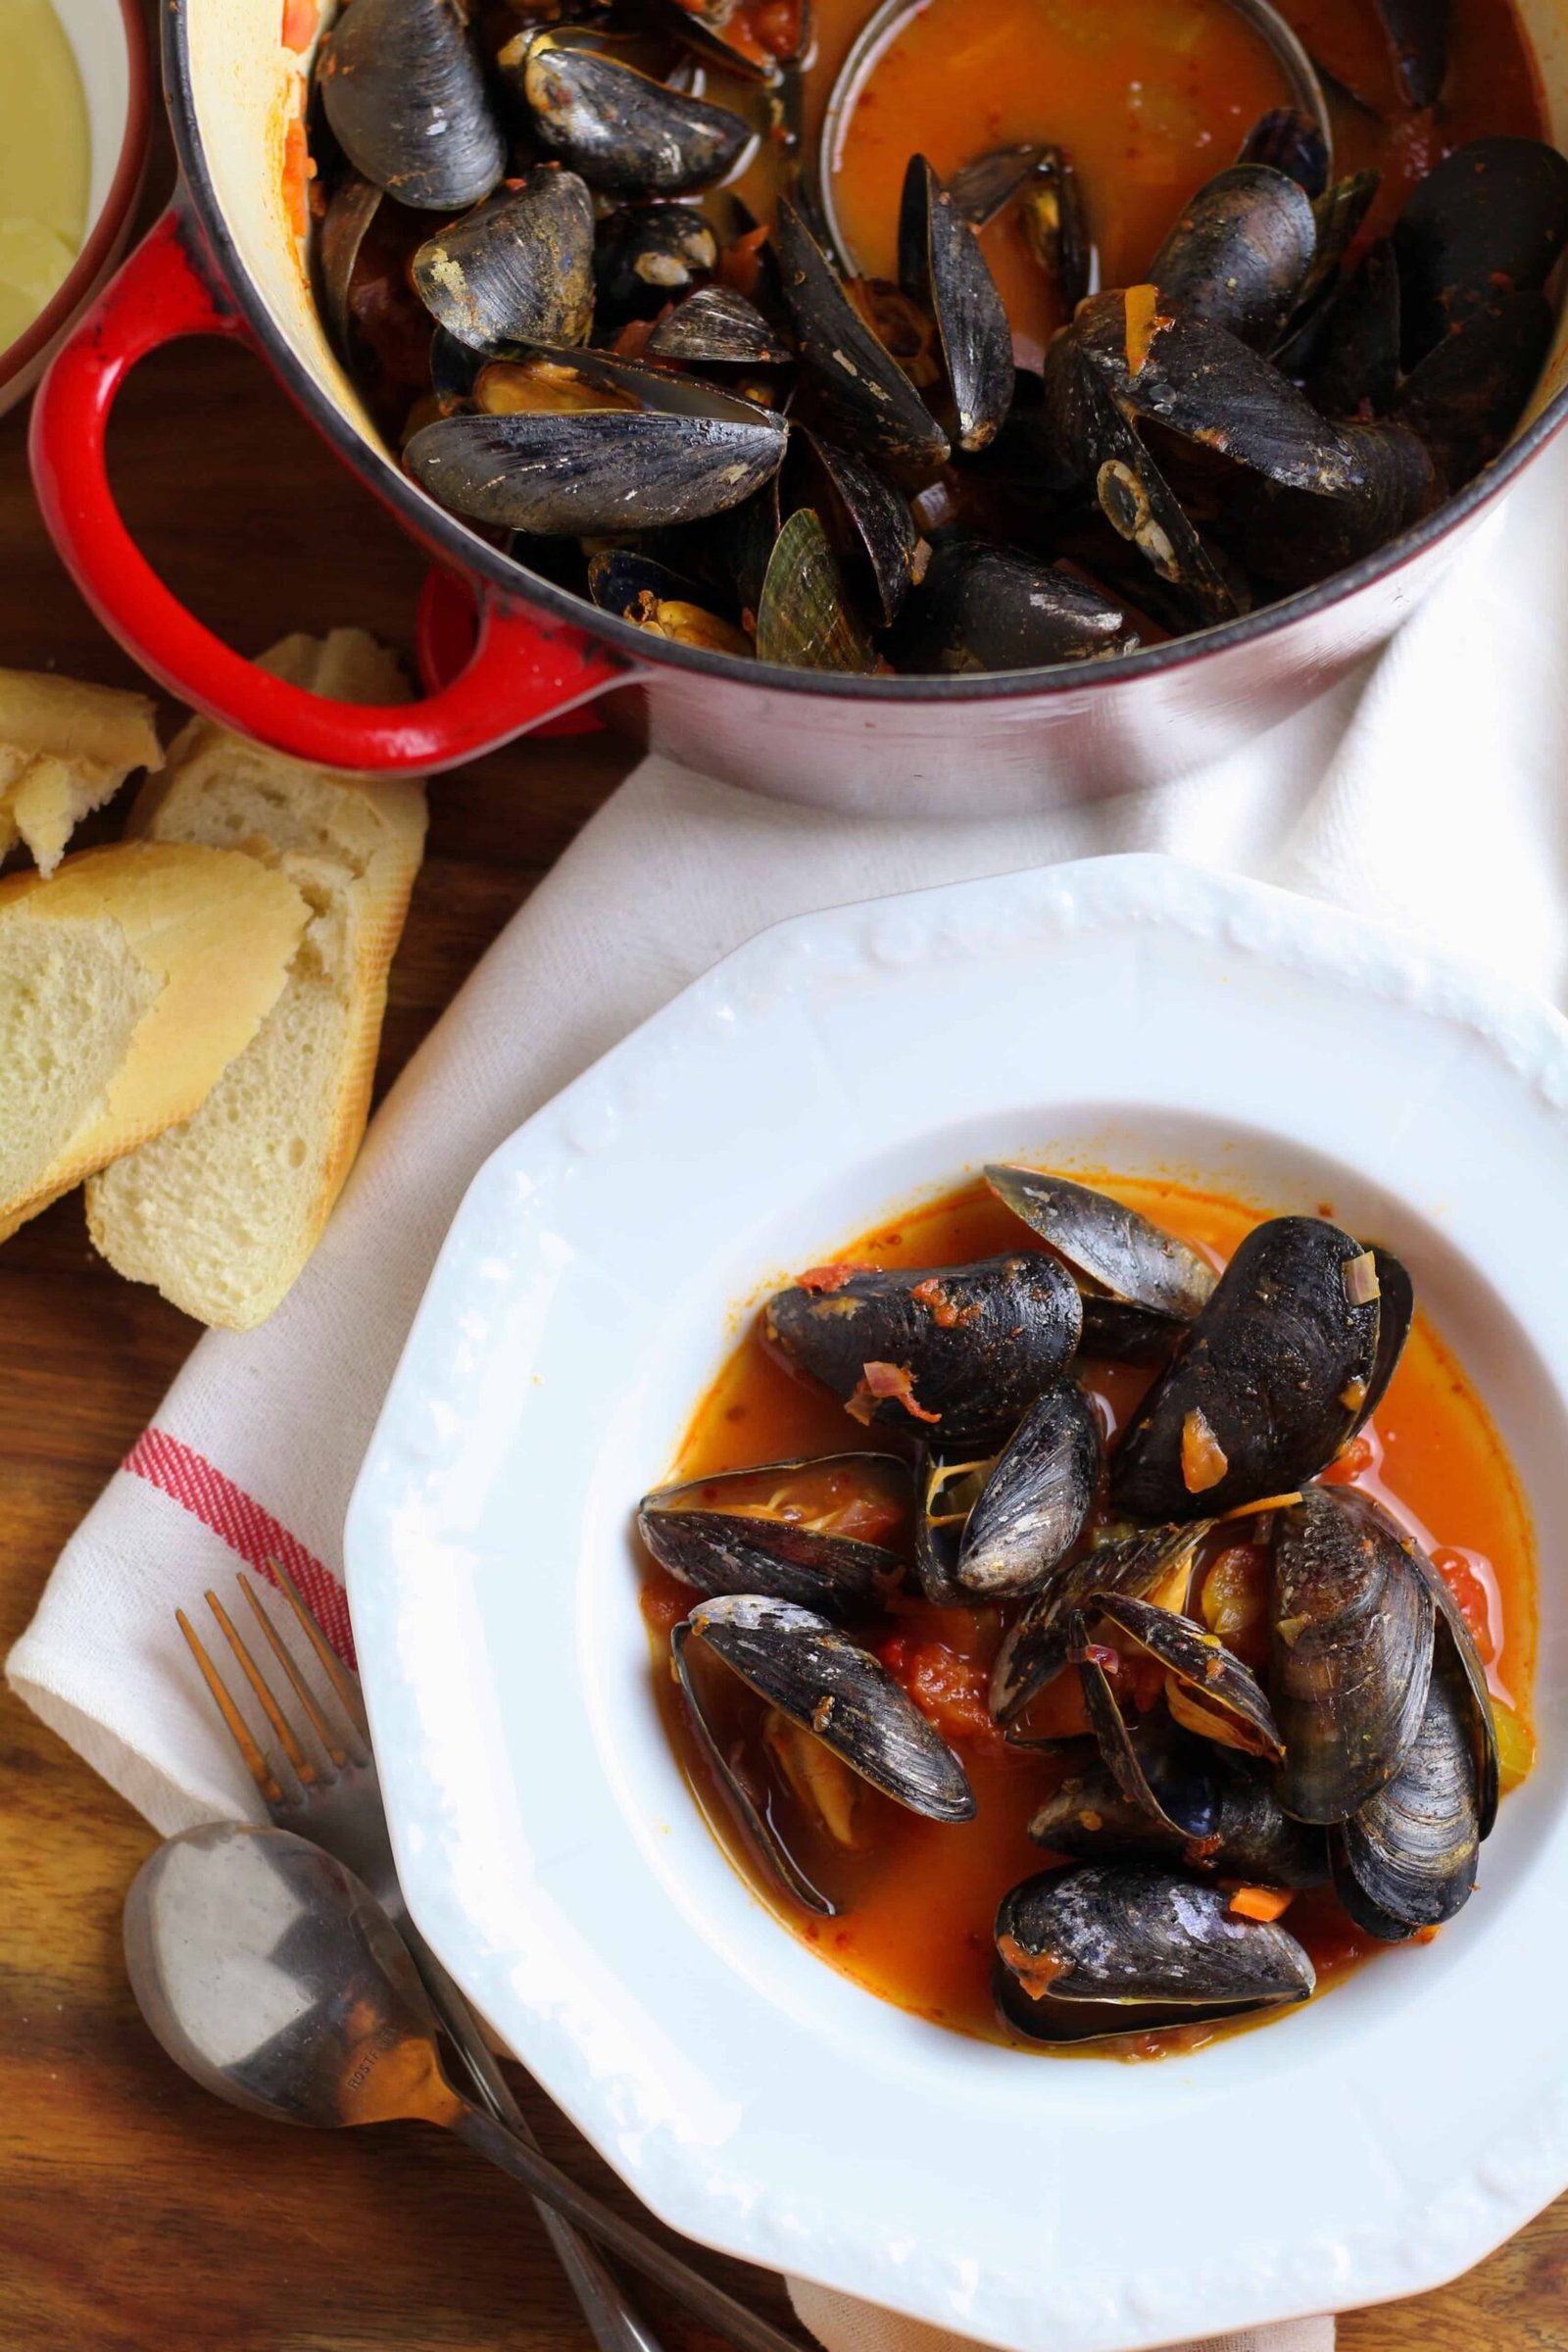 Spicy Tomato and Garlic Mussels